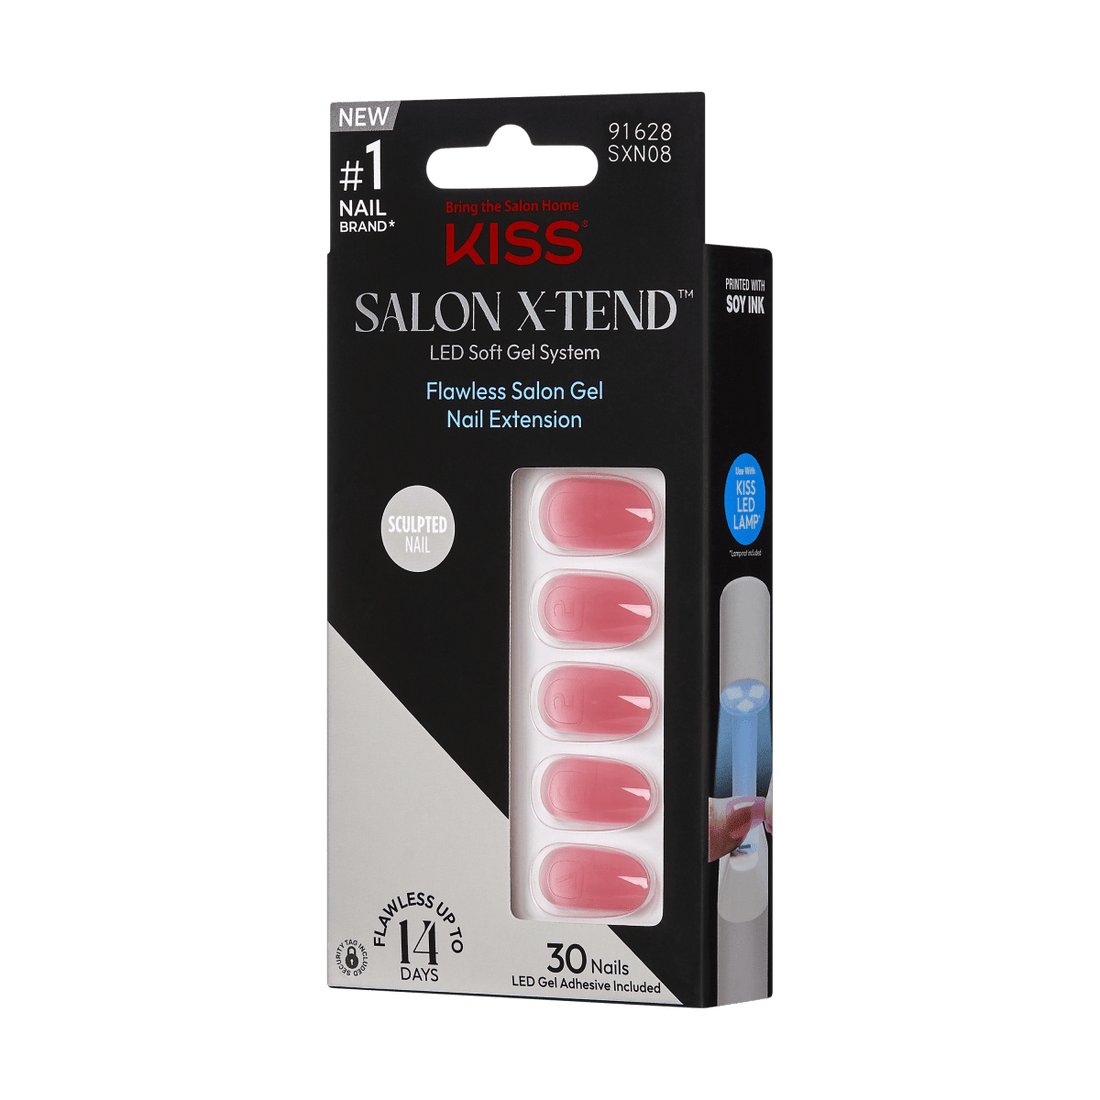 KISS Salon X-tend, Press-On Nails, A Happy Day, Pink, Med Oval, 30ct